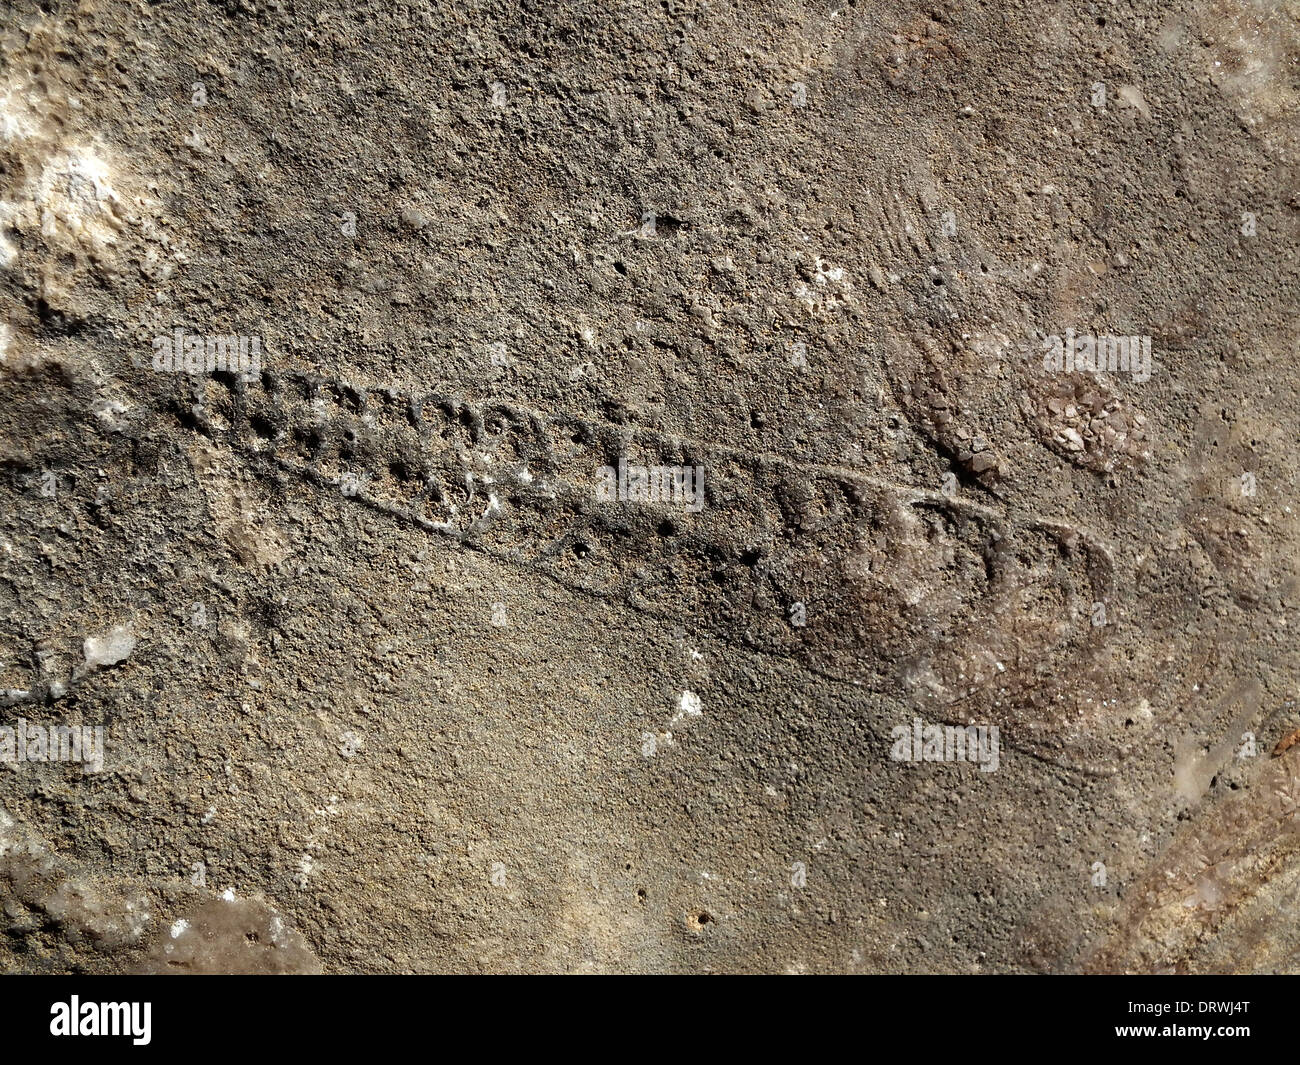 Ffnung Fossilien Canyon Rim Trail Seminole Canyon State Park Texas USA Stockfoto